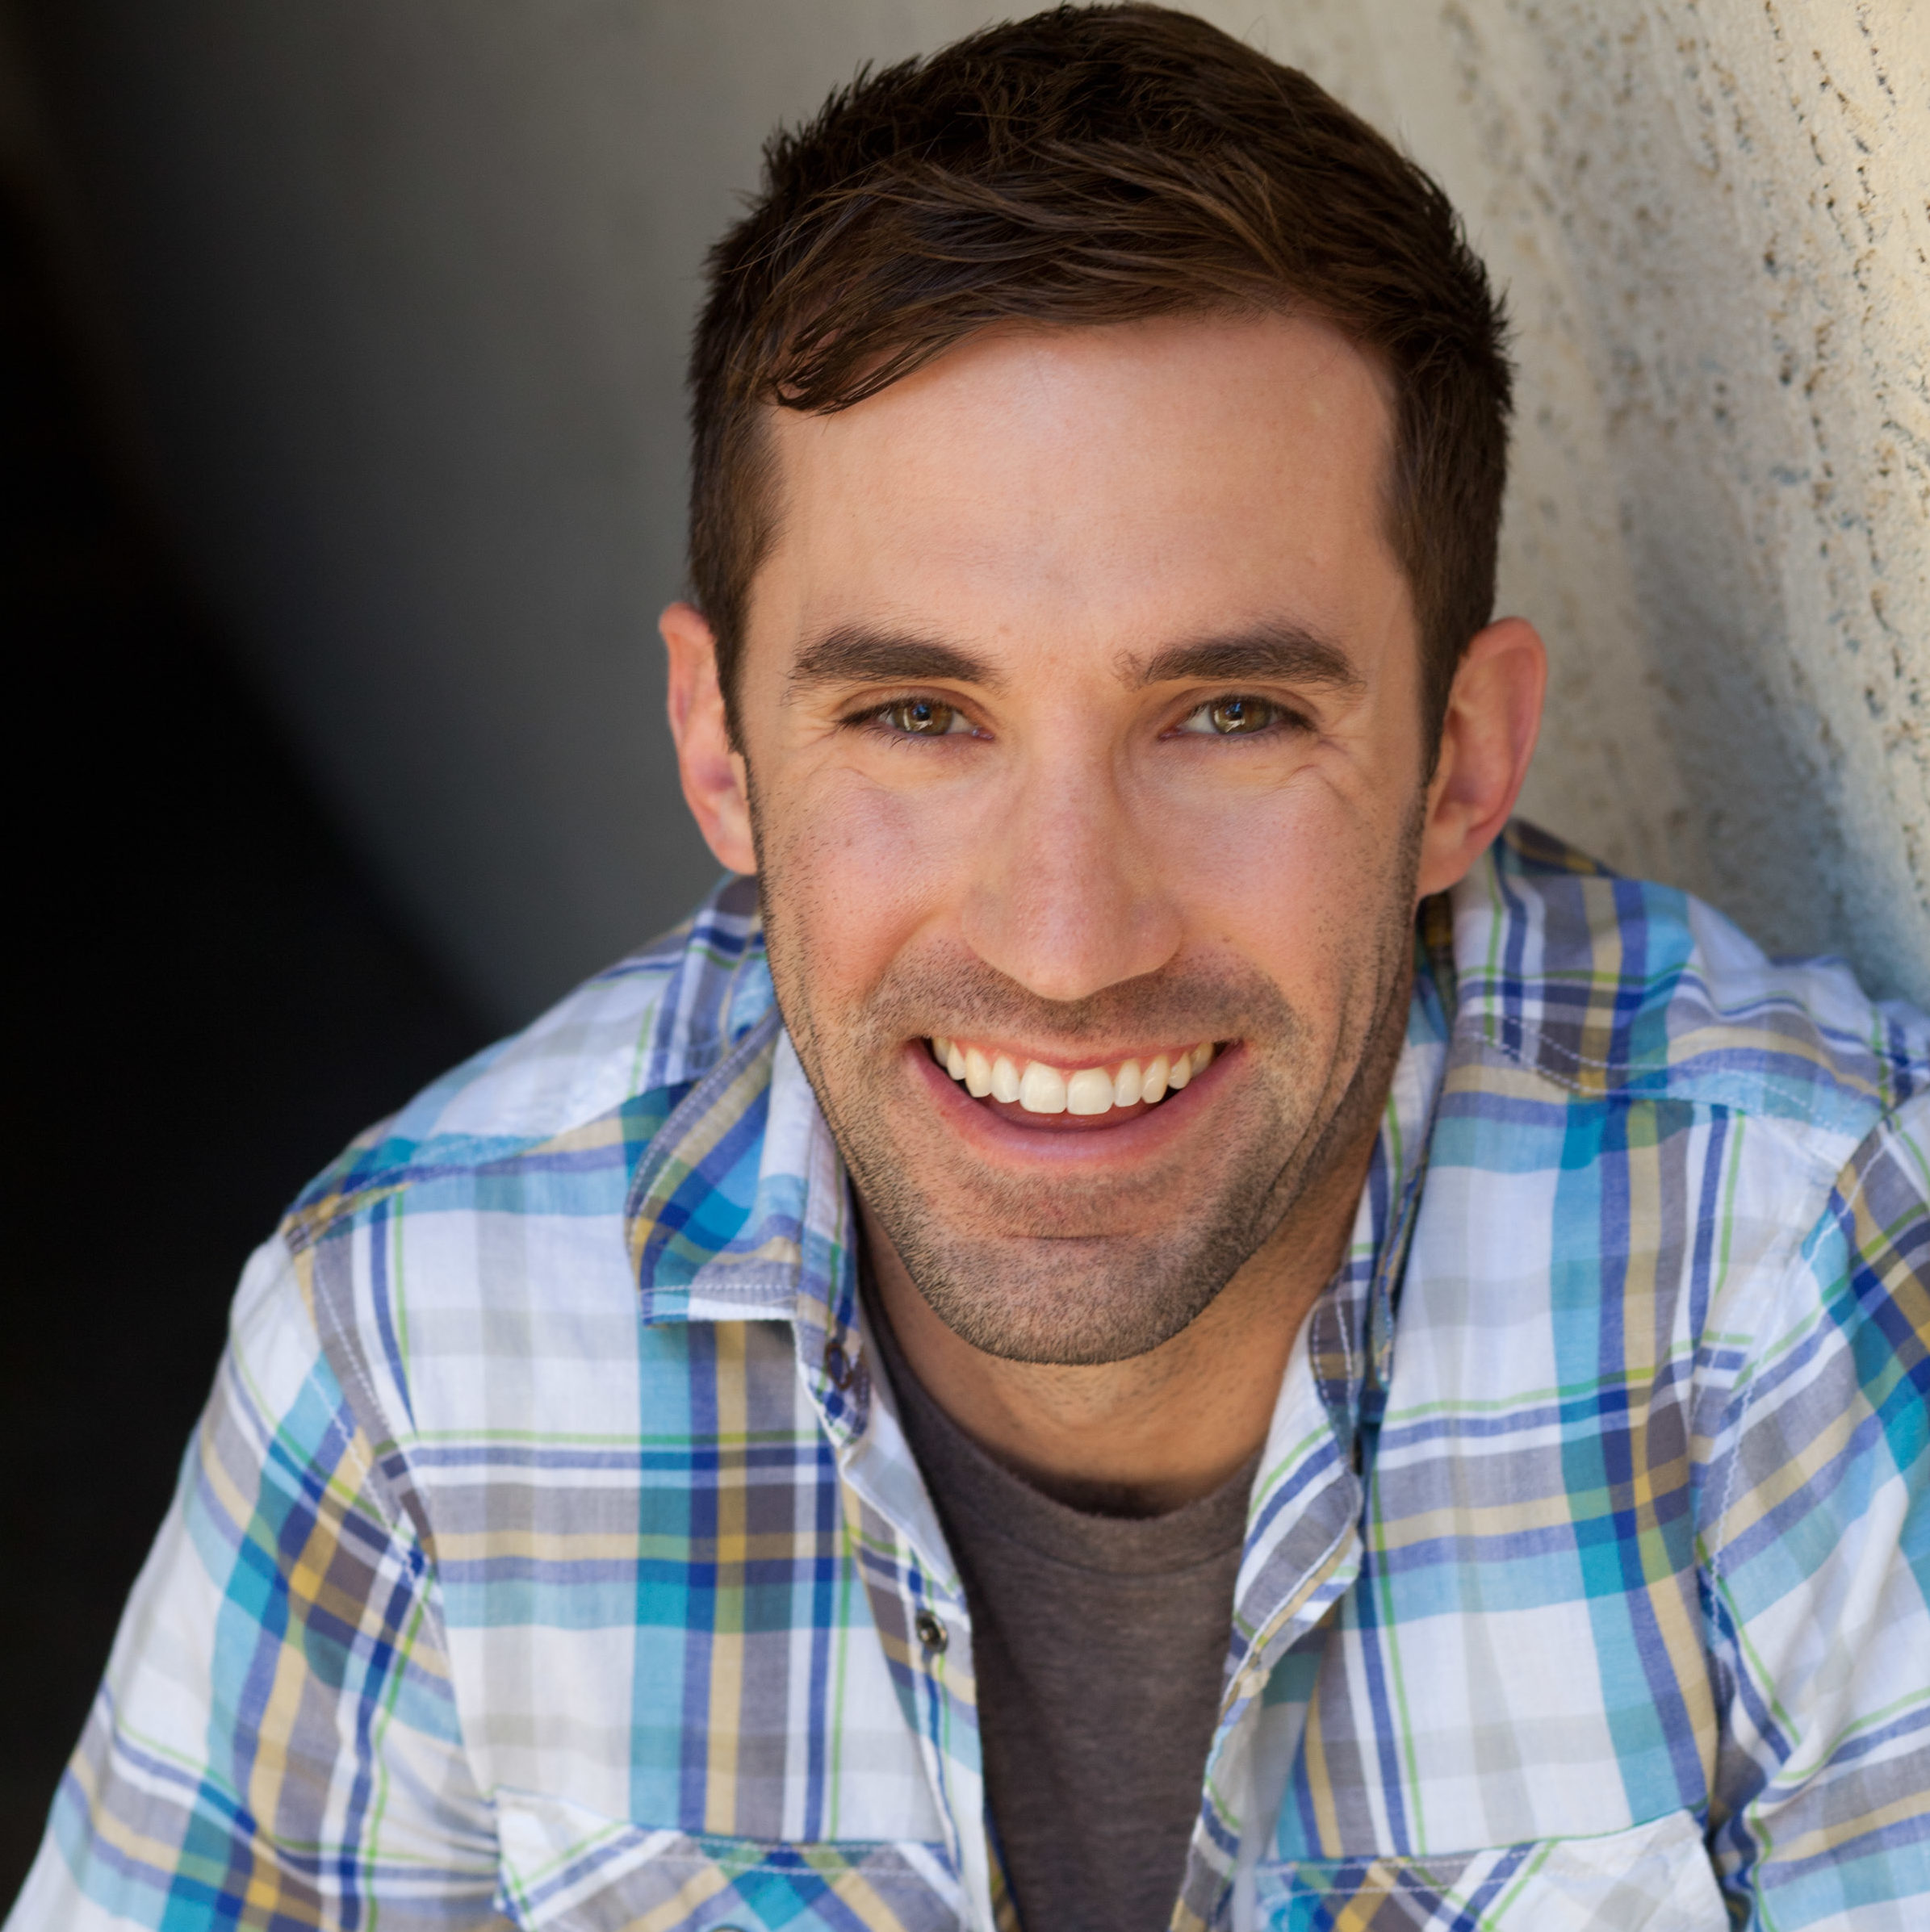 Michael Palascak is smiling while wearing a plaid button down with a gray t-shirt underneath.